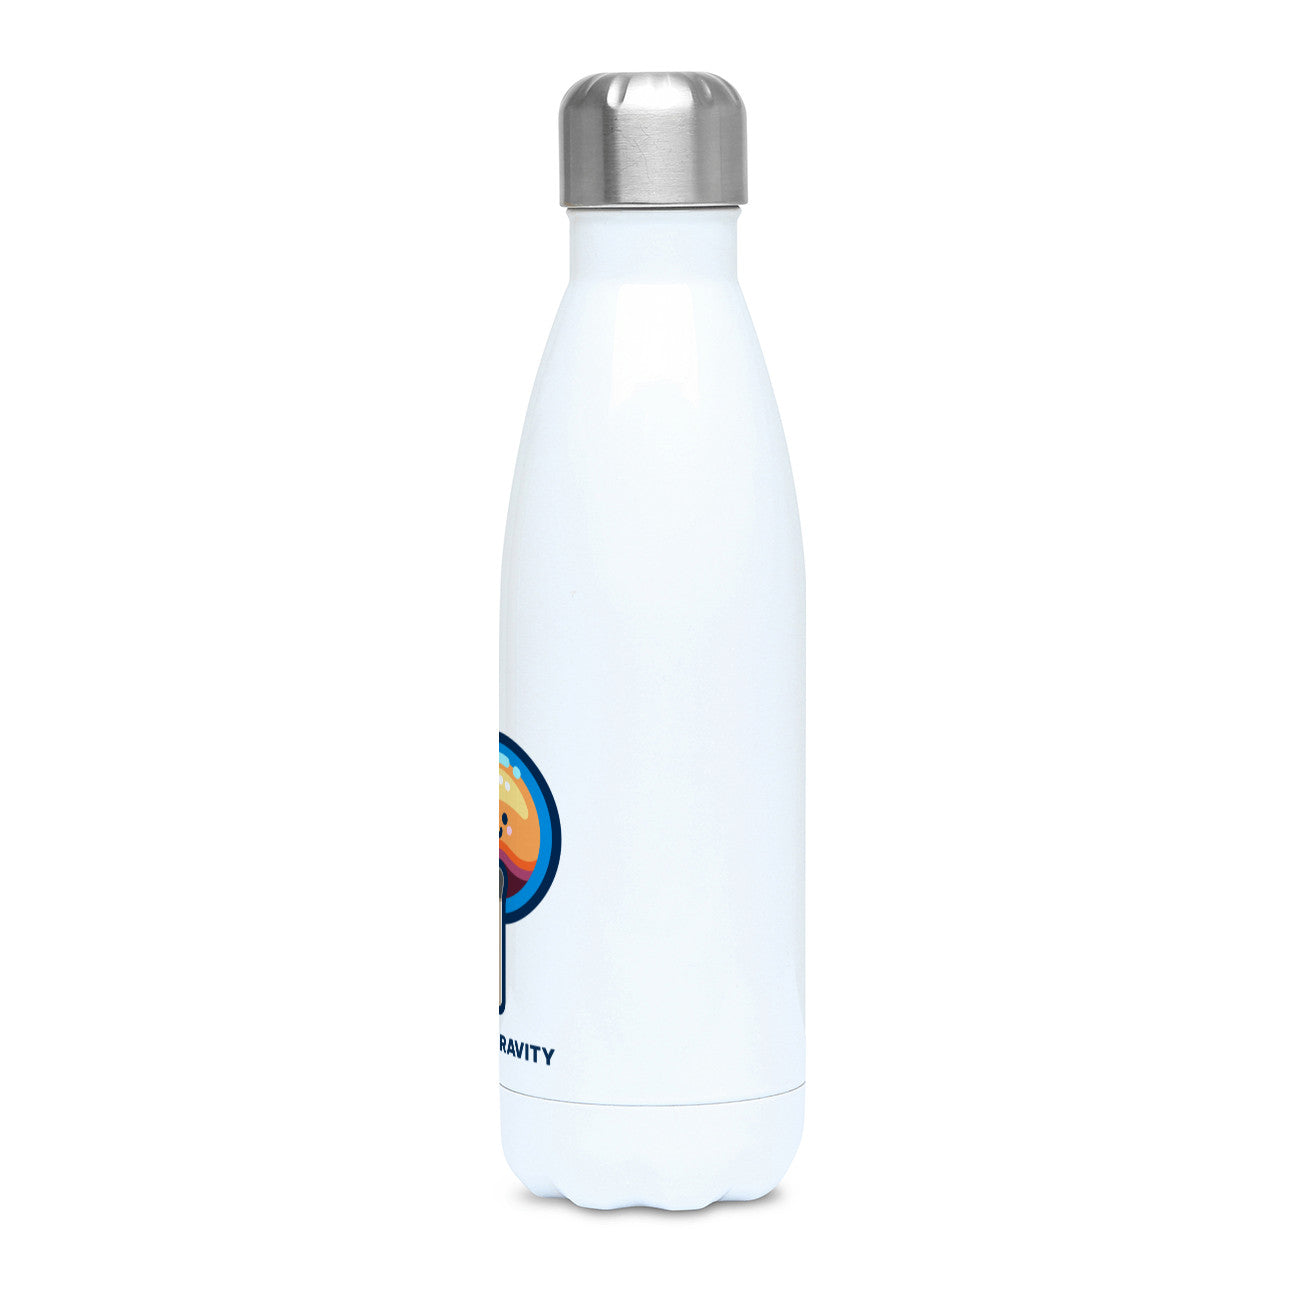 A white stainless steel drinks bottle, lid on, showing a side view with only the edge of the design visible